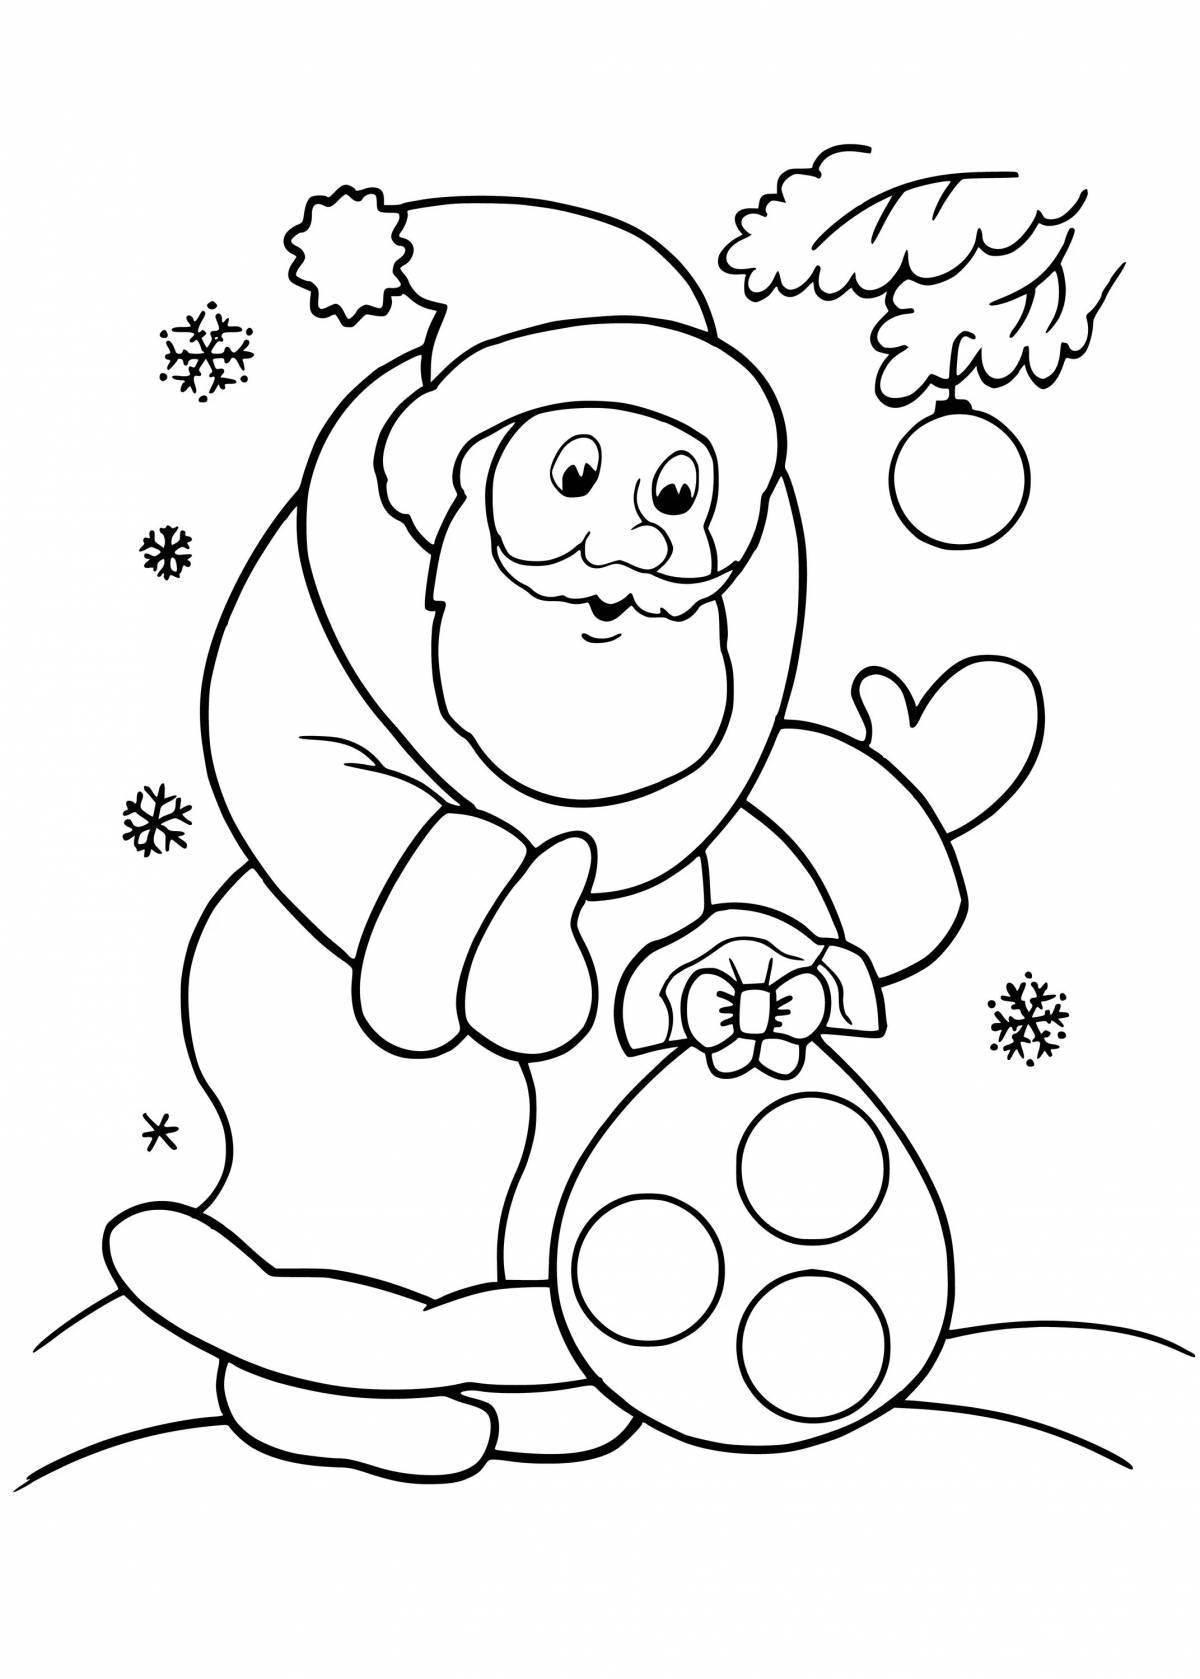 A colorfully decorated Christmas coloring book for kids